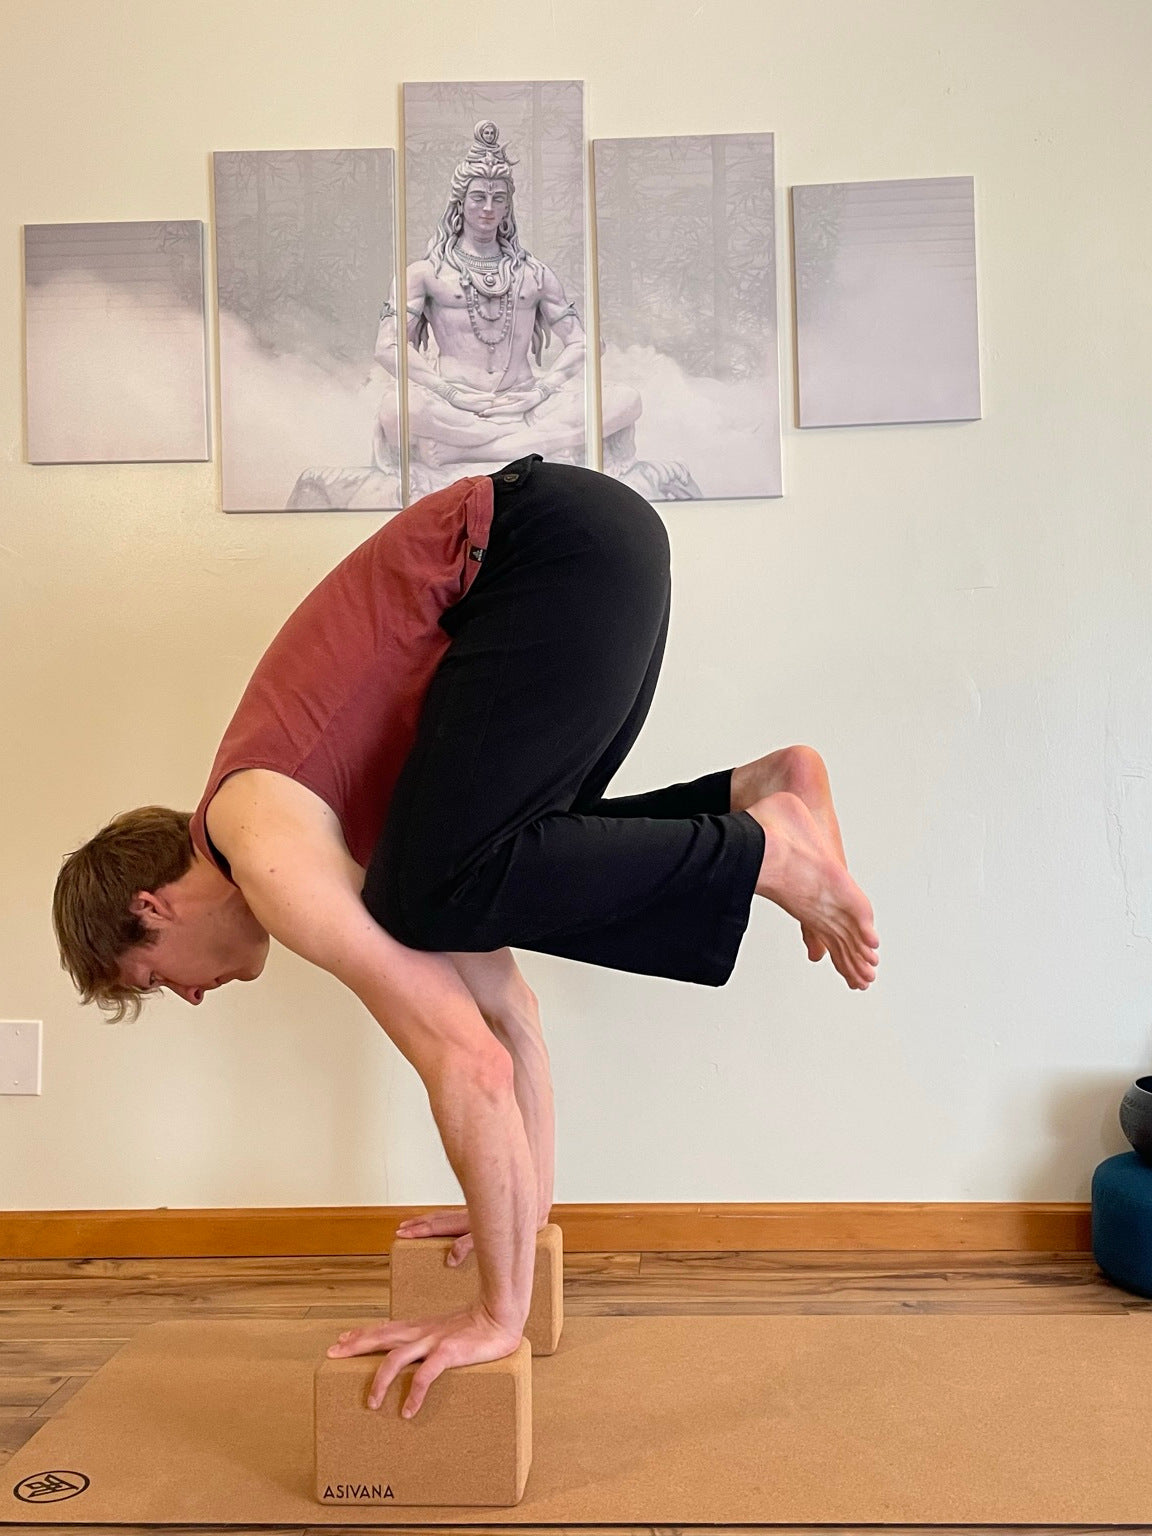 Inspiring Yoga - One-legged Supported Bridge Pose on yoga block — Sometimes  you need a little support. None of us can get through life alone. We all  need help, support, and guidance